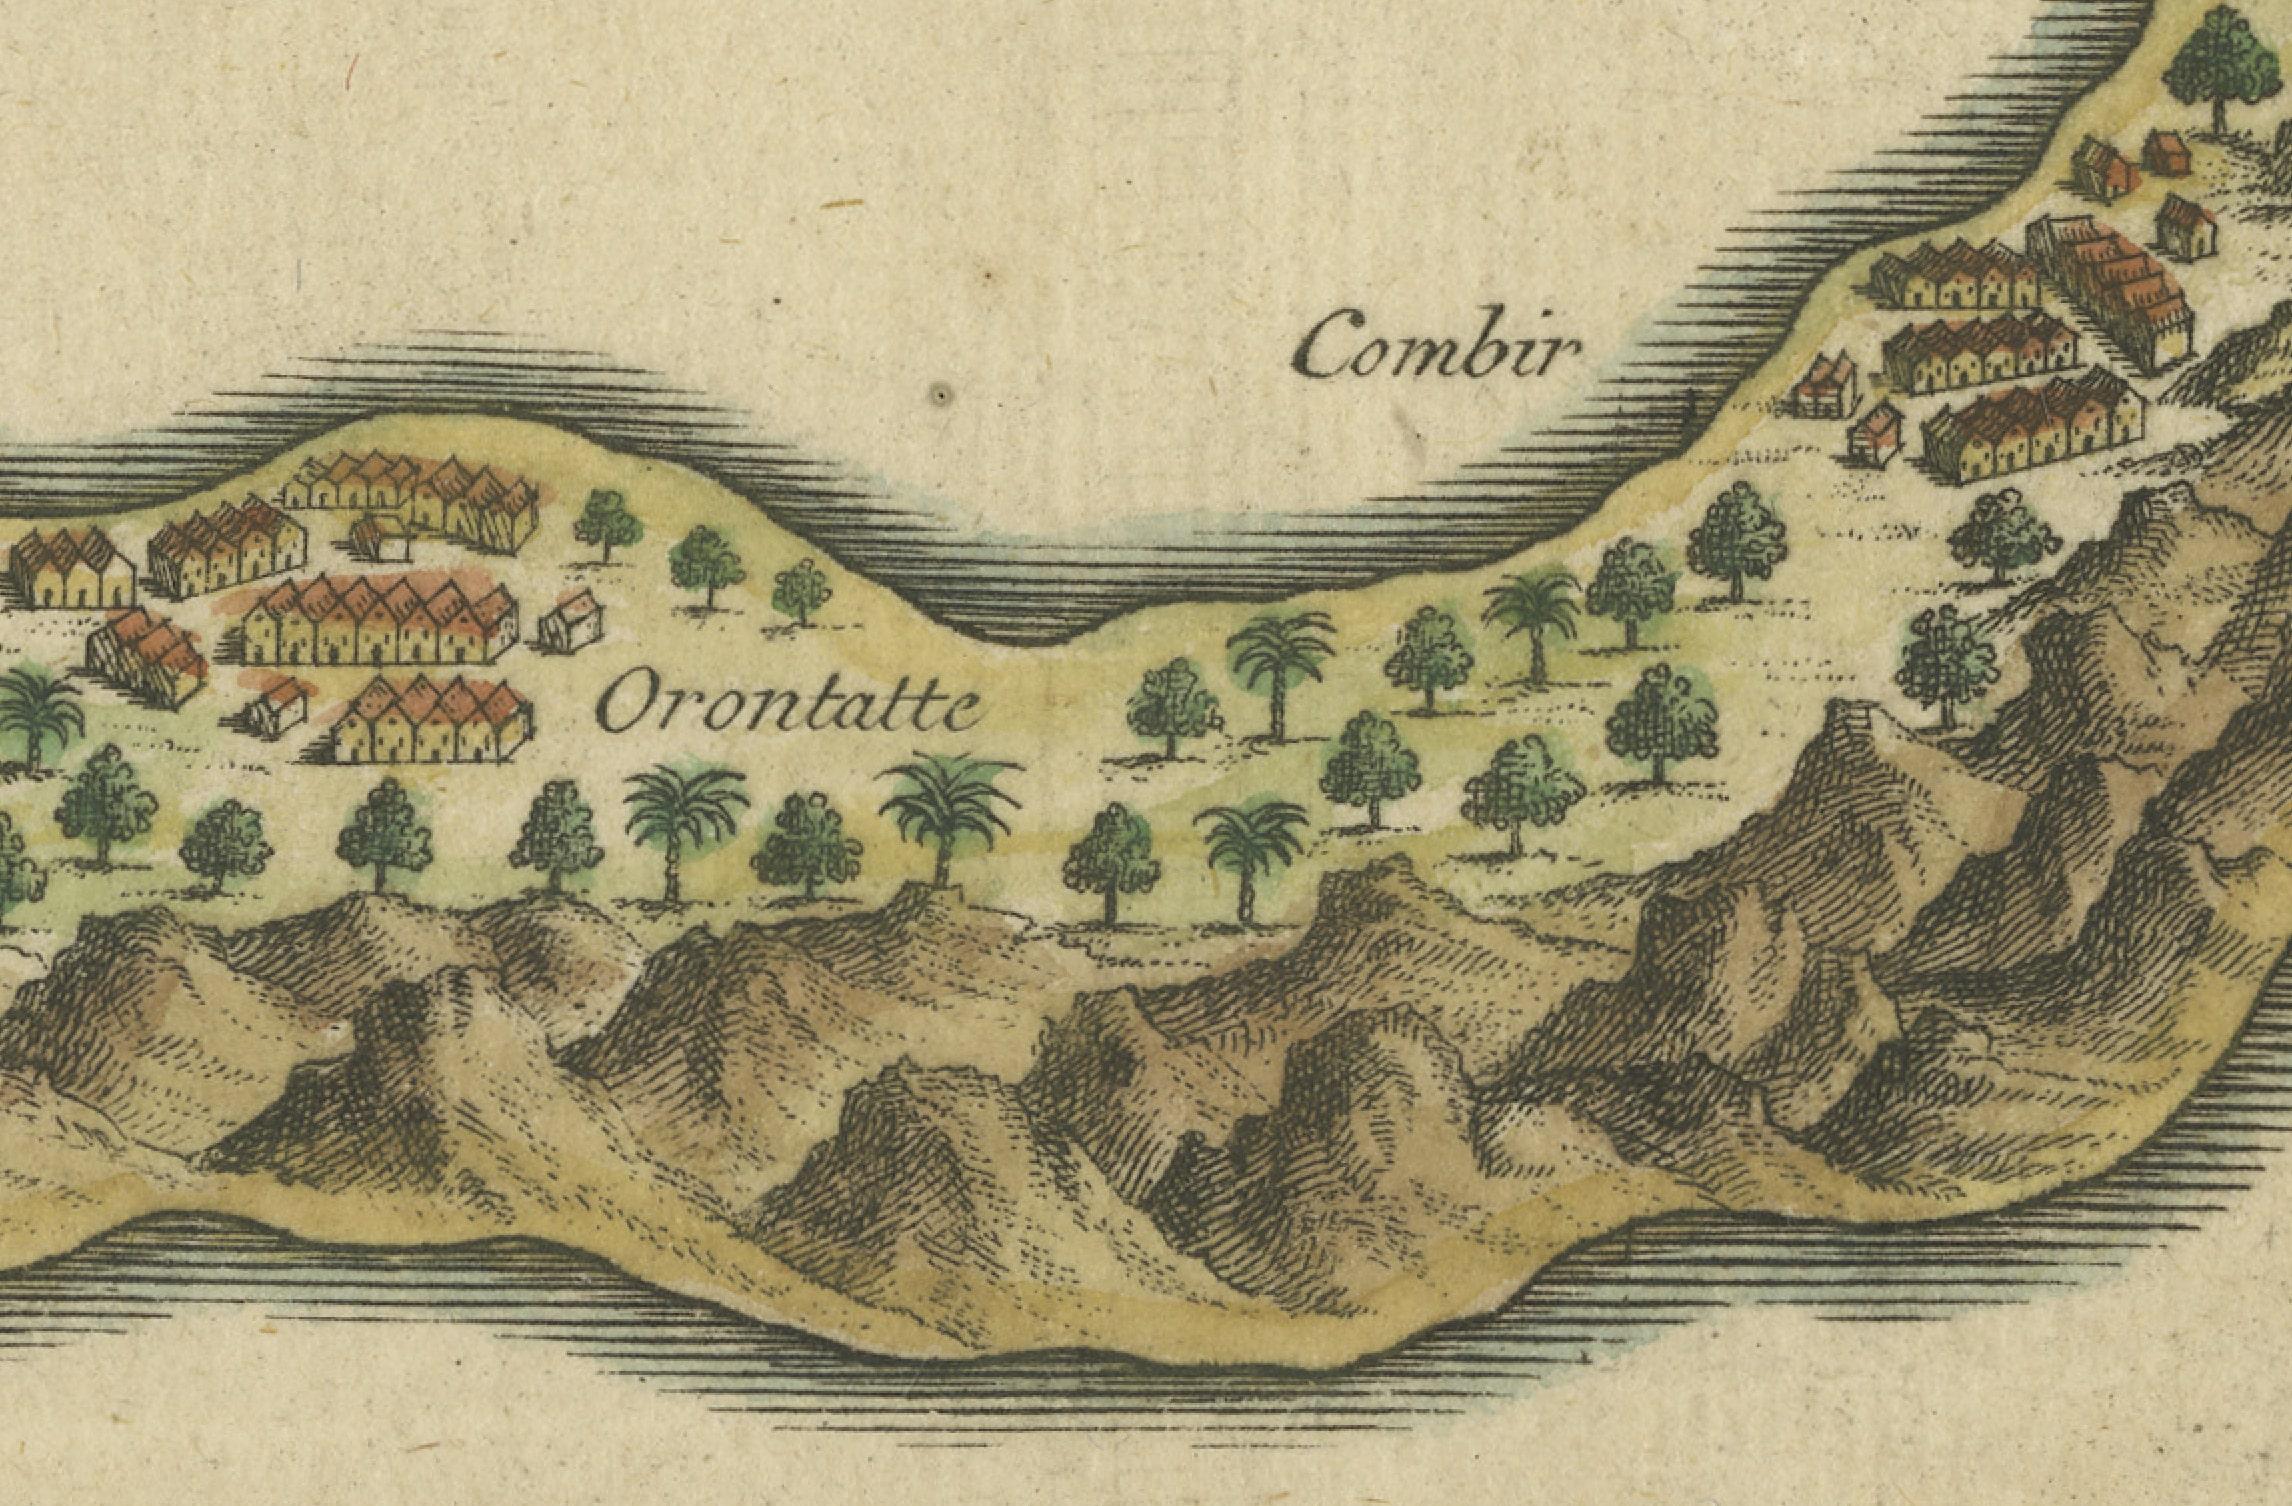 Mid-18th Century Spice Epicenter: Engraving of The Banda Islands in the Age of Exploration, 1753